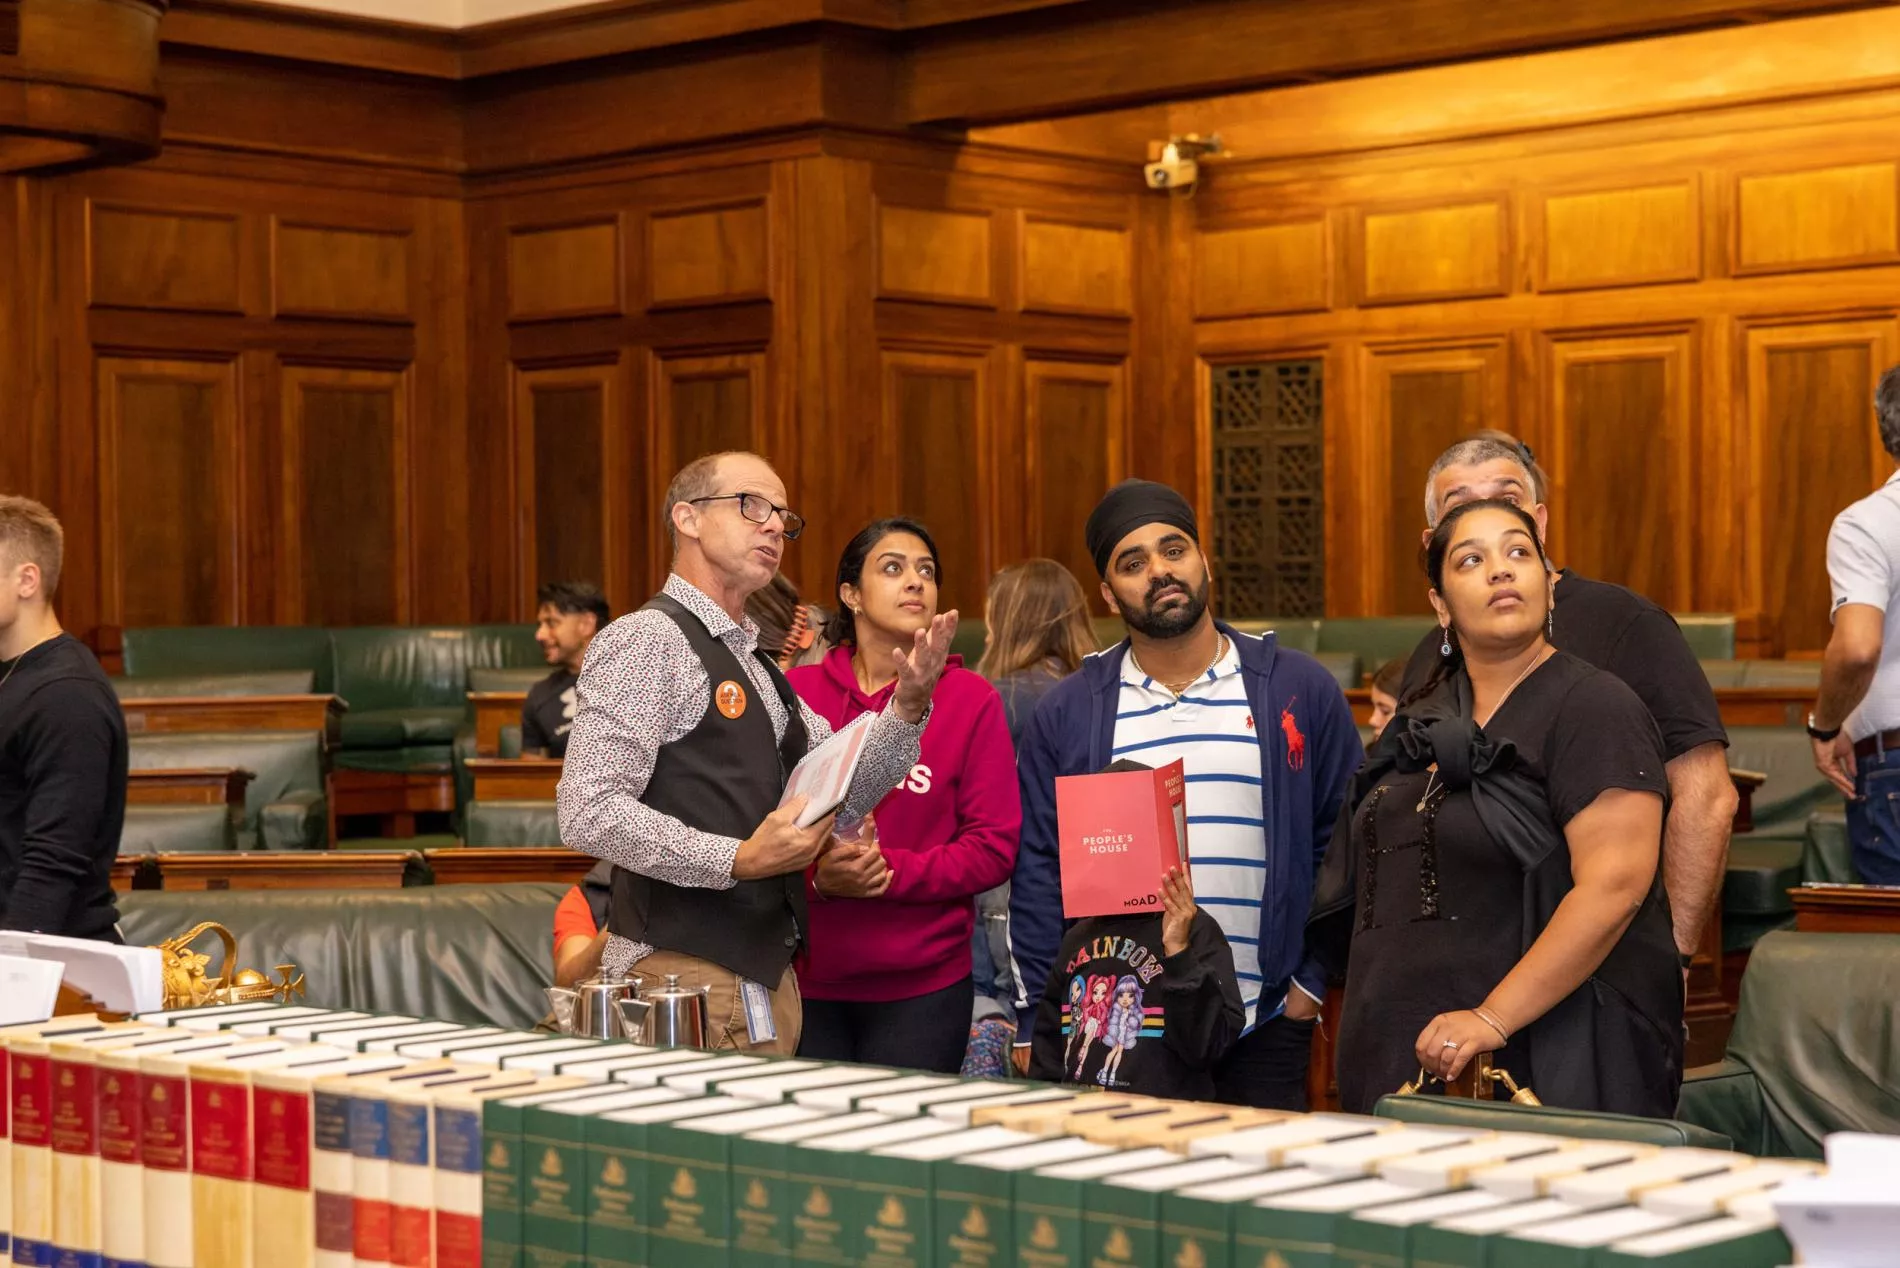 A tour guide points to something above a group of people listening to his tour. They are in the House of Representatives Chamber with green leather chairs behind them and leather bound books stacked on a central table in front of them.